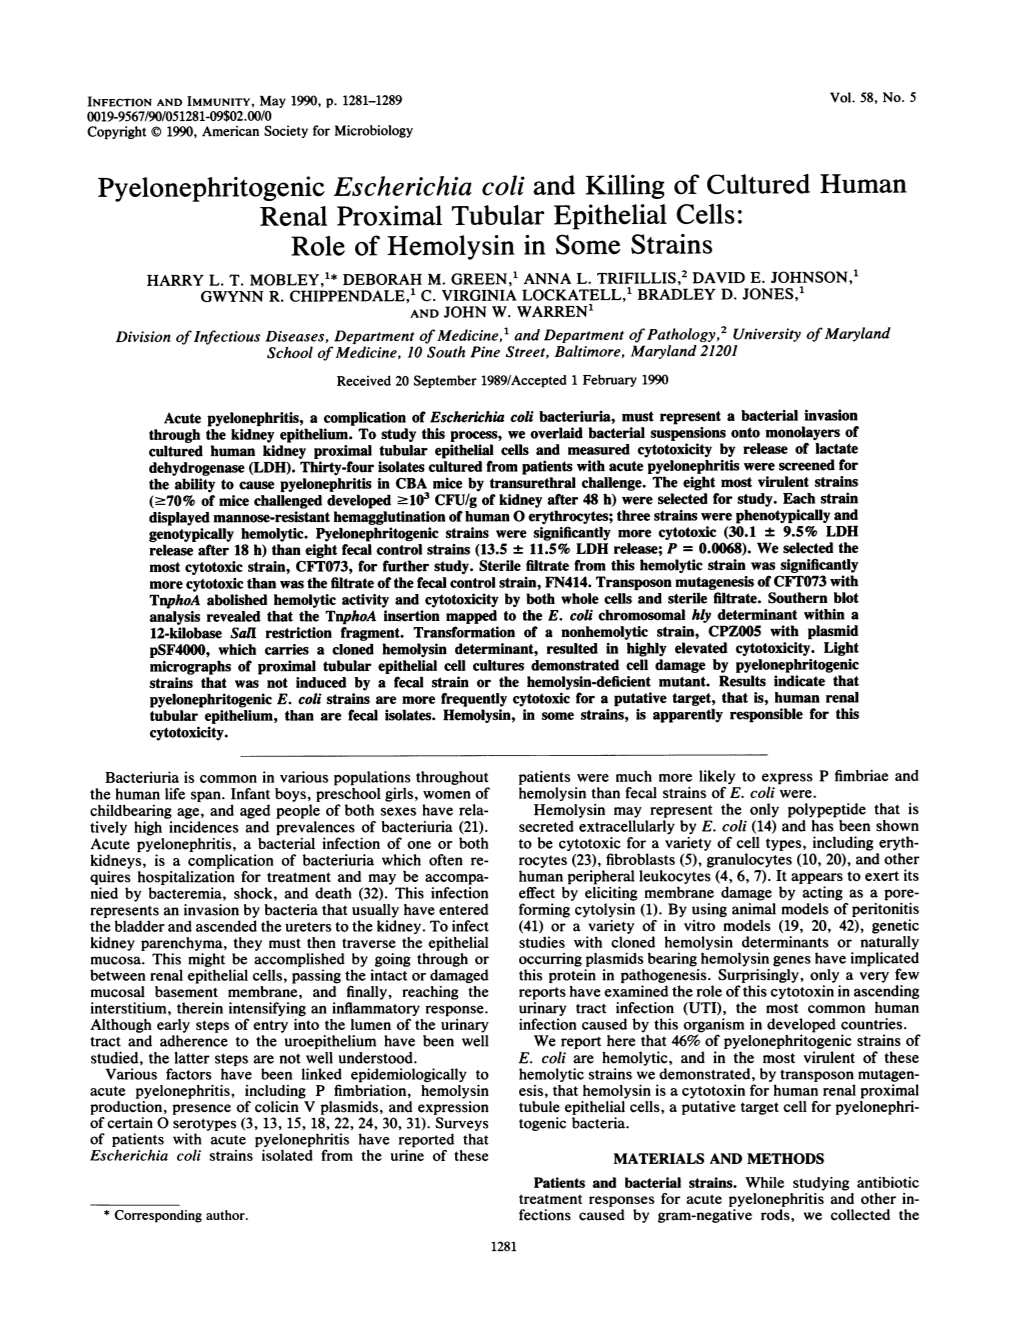 Pyelonephritogenic Escherichia Coli and Killing of Cultured Human Renal Proximal Tubular Epithelial Cells: Role of Hemolysin in Some Strains HARRY L